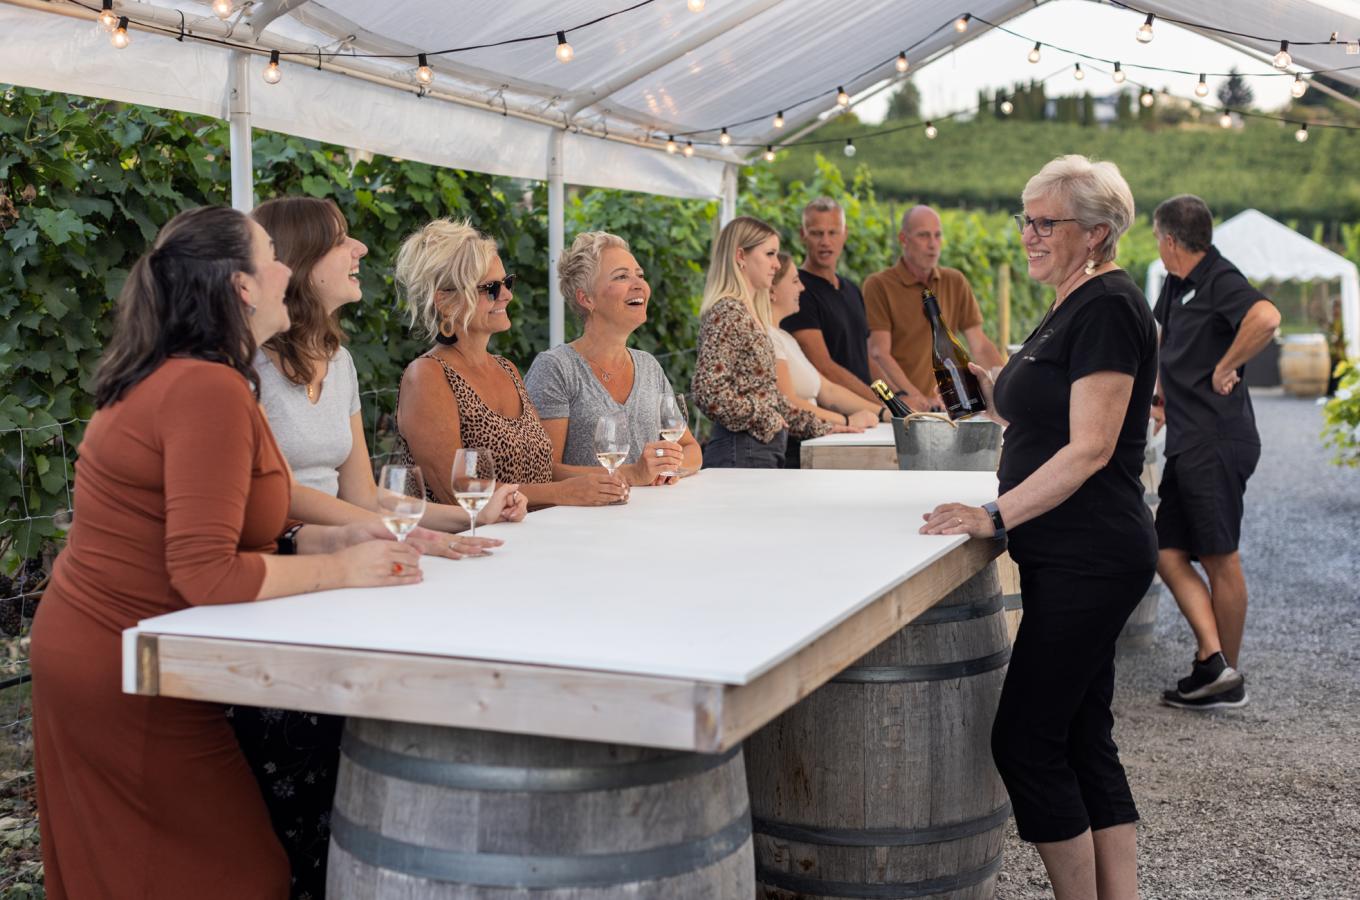 Outdoor tasting experience on a tour at Intrigue Wines in Lake Country